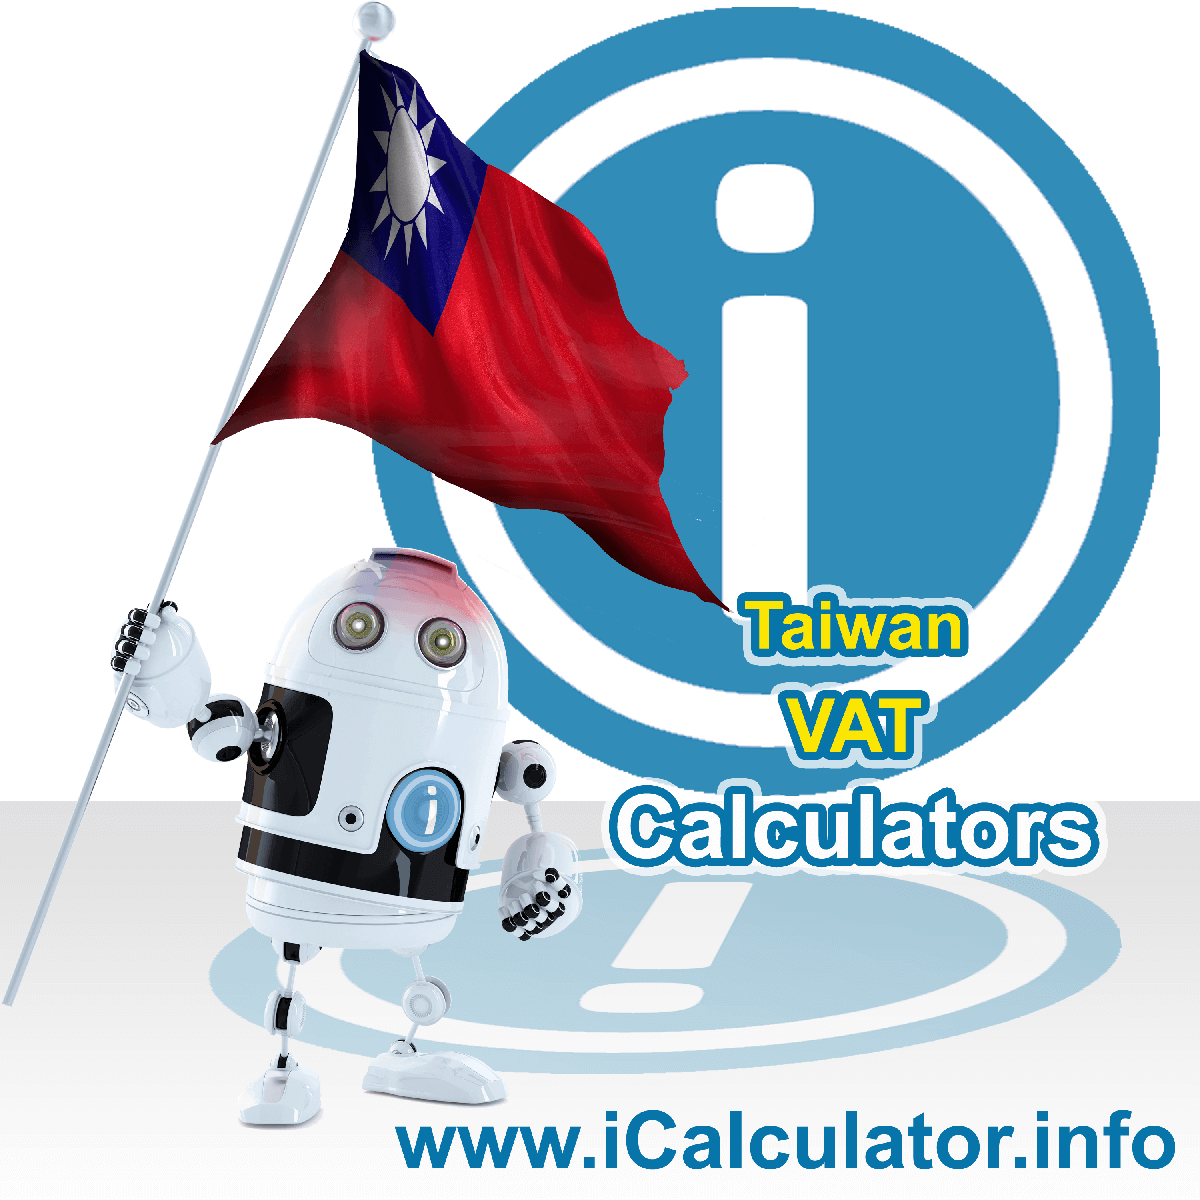 Taiwan VAT Calculator. This image shows the Taiwan flag and information relating to the VAT formula used for calculating Value Added Tax in Taiwan using the Taiwan VAT Calculator in 2023